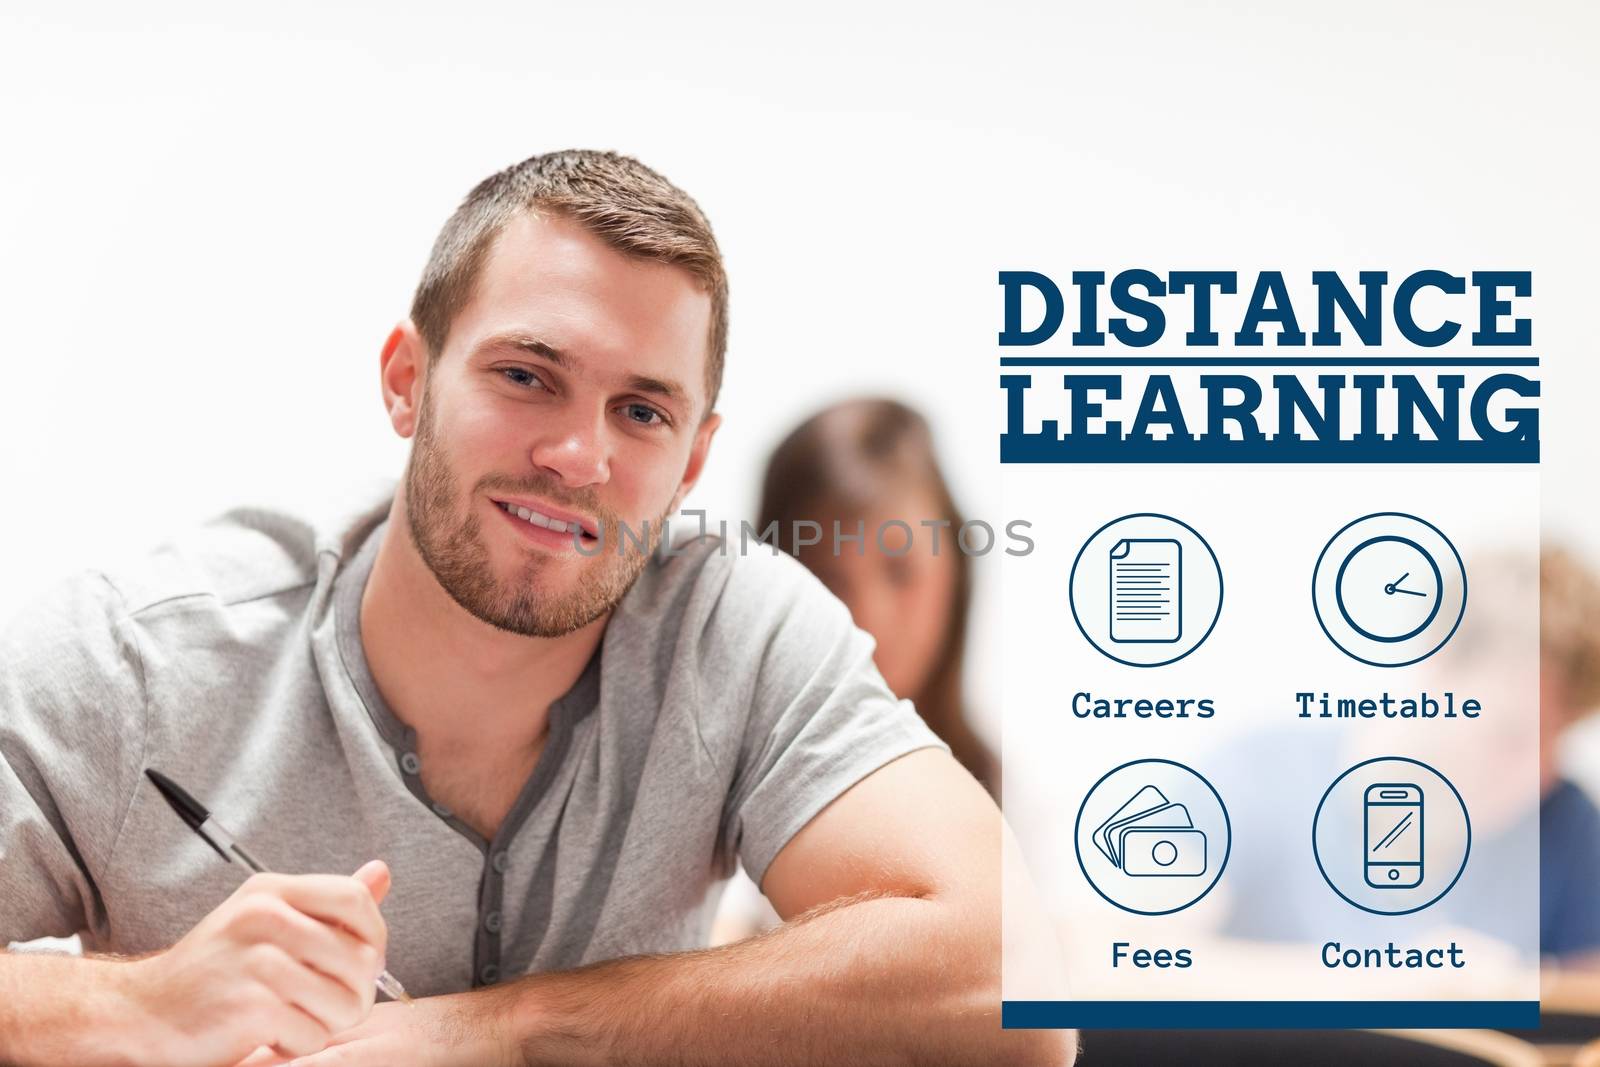 Education and distance learning text and icons and man sitting by Wavebreakmedia